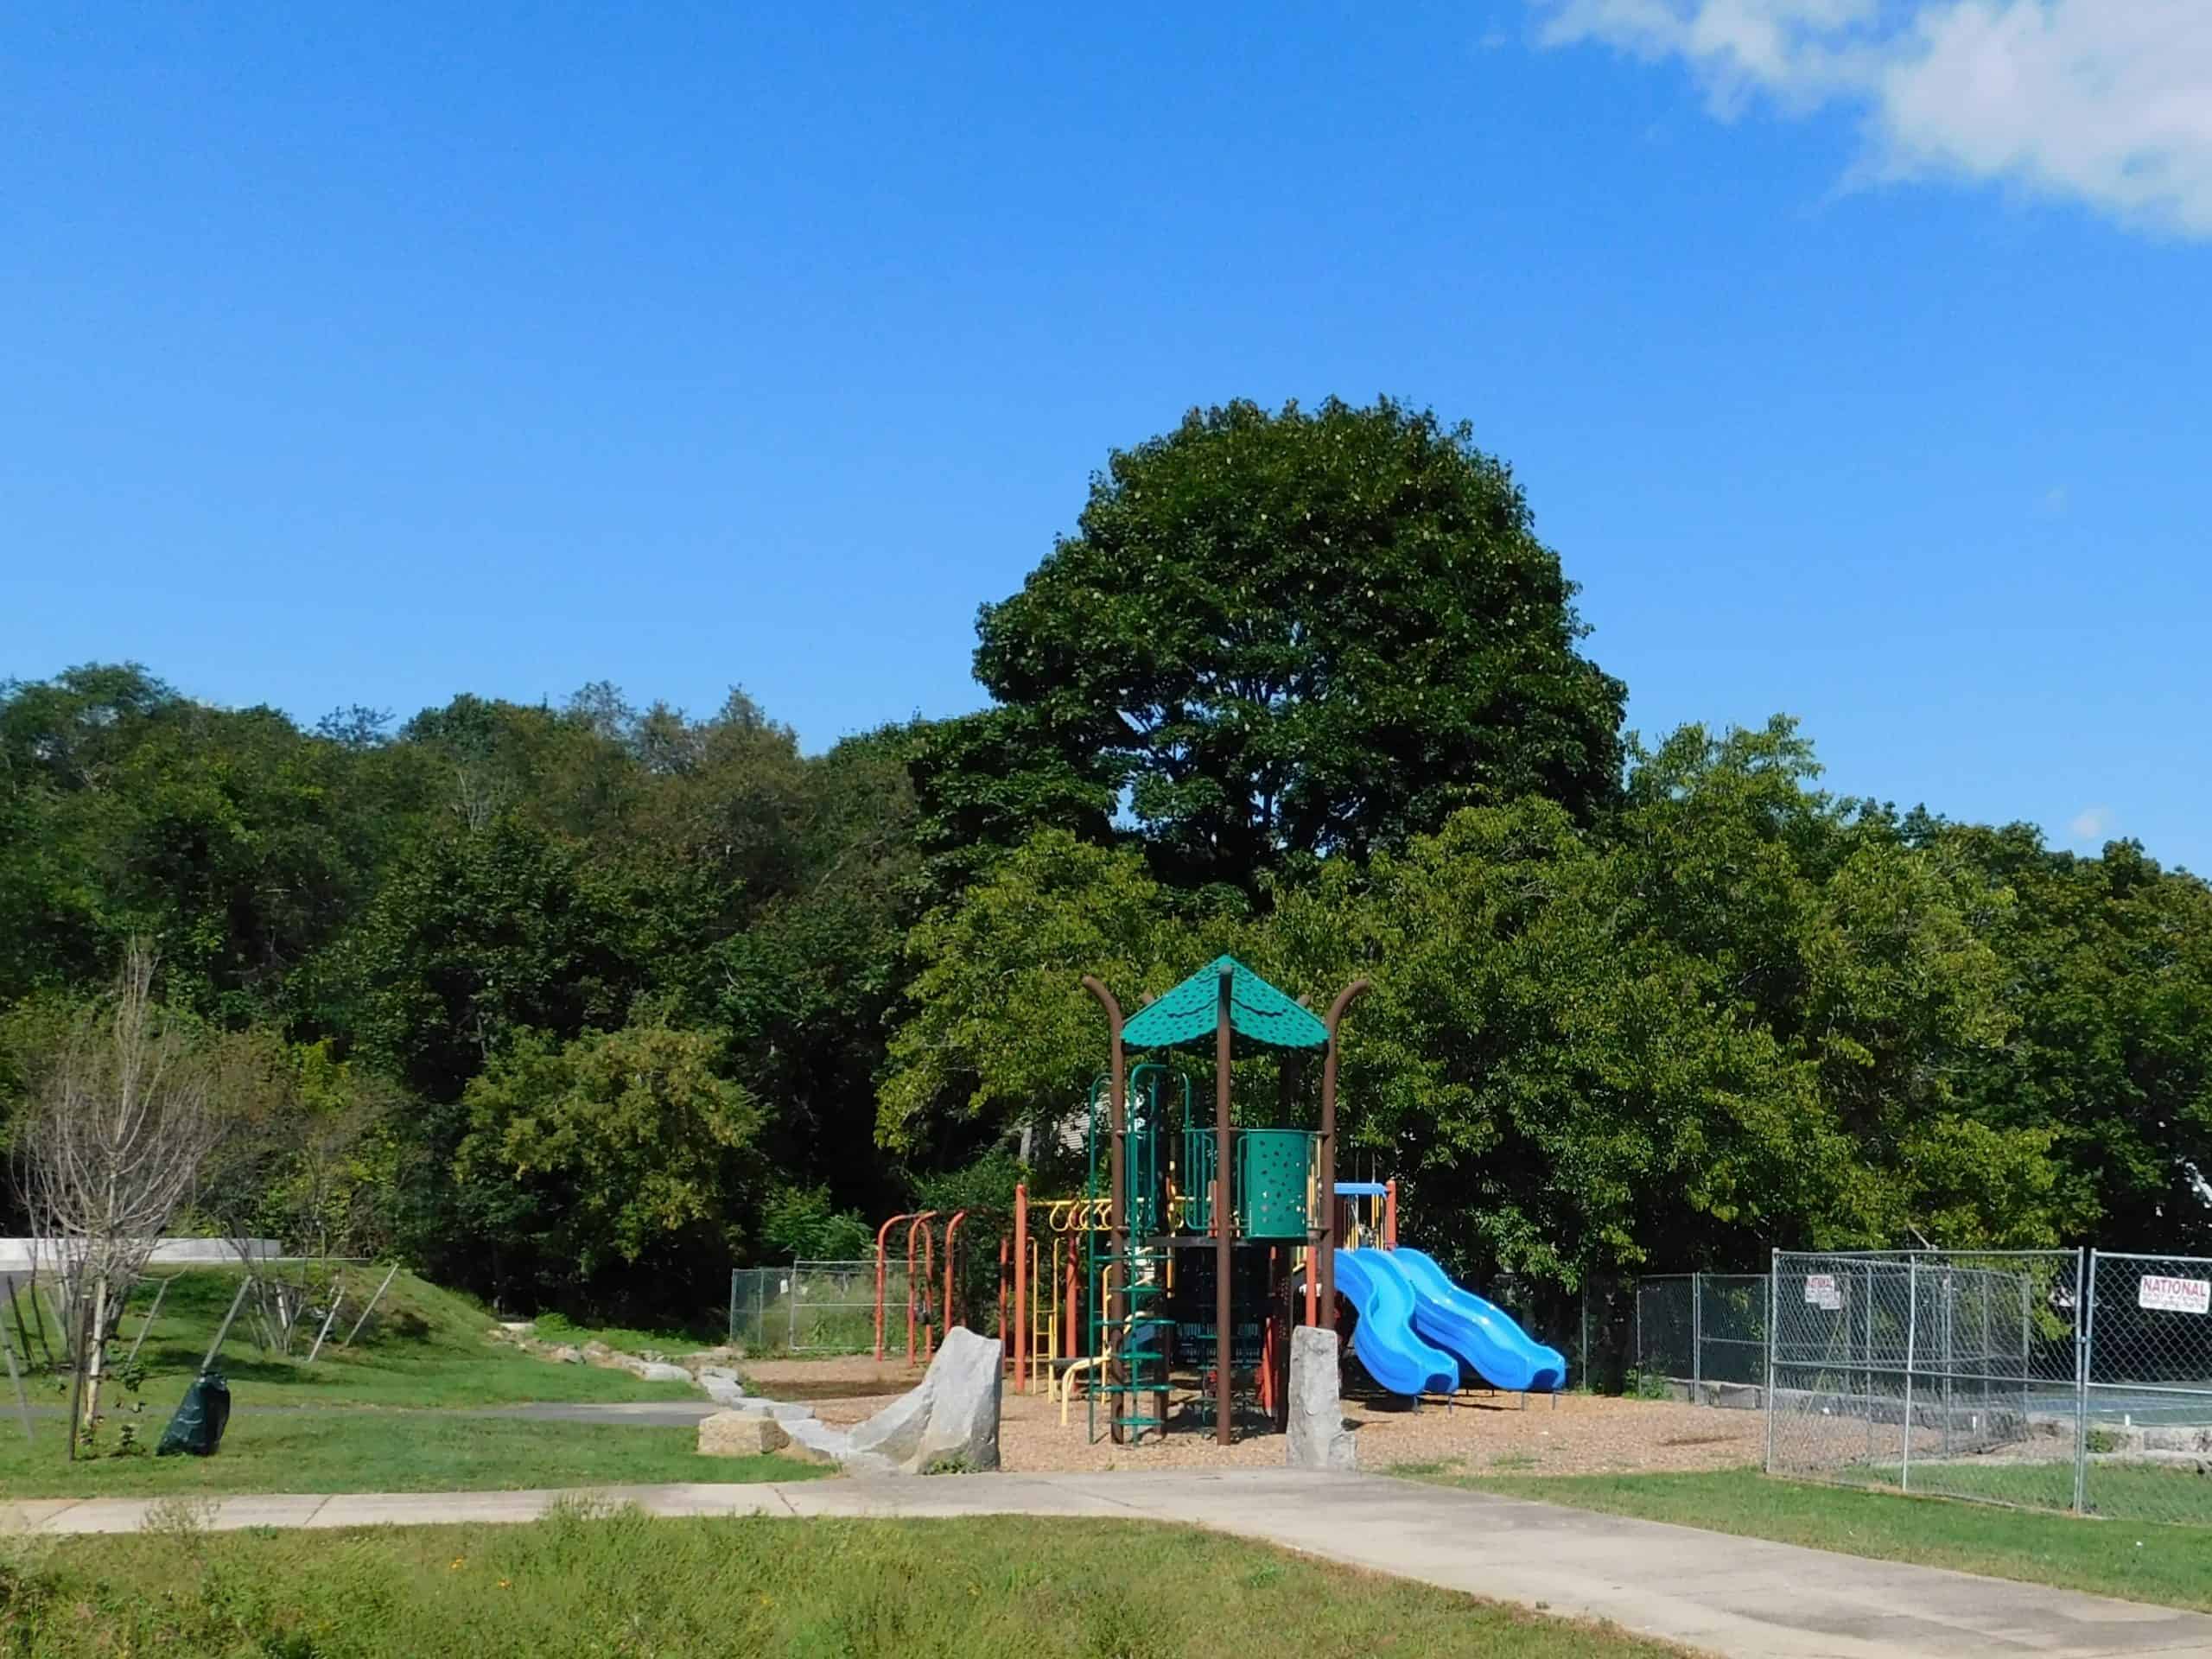 Best things to do in Salem Massachusetts - Kate Wallinga - Gallows Hill Park playground